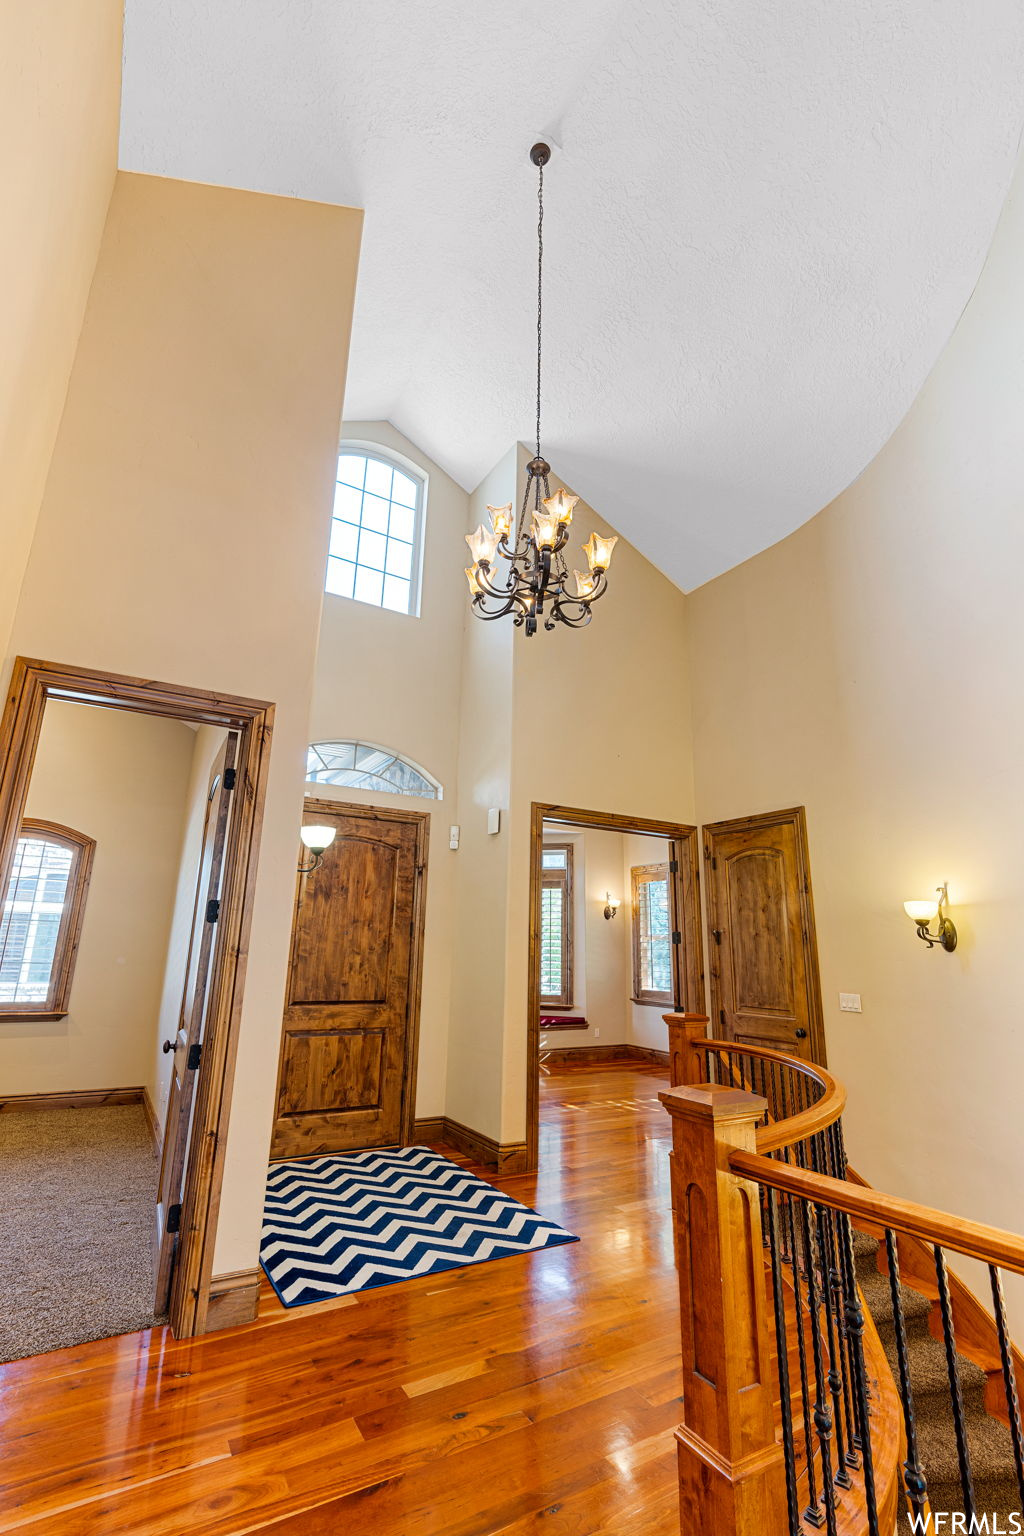 Hardwood floored foyer entrance featuring vaulted ceiling high, a notable chandelier, and a healthy amount of sunlight